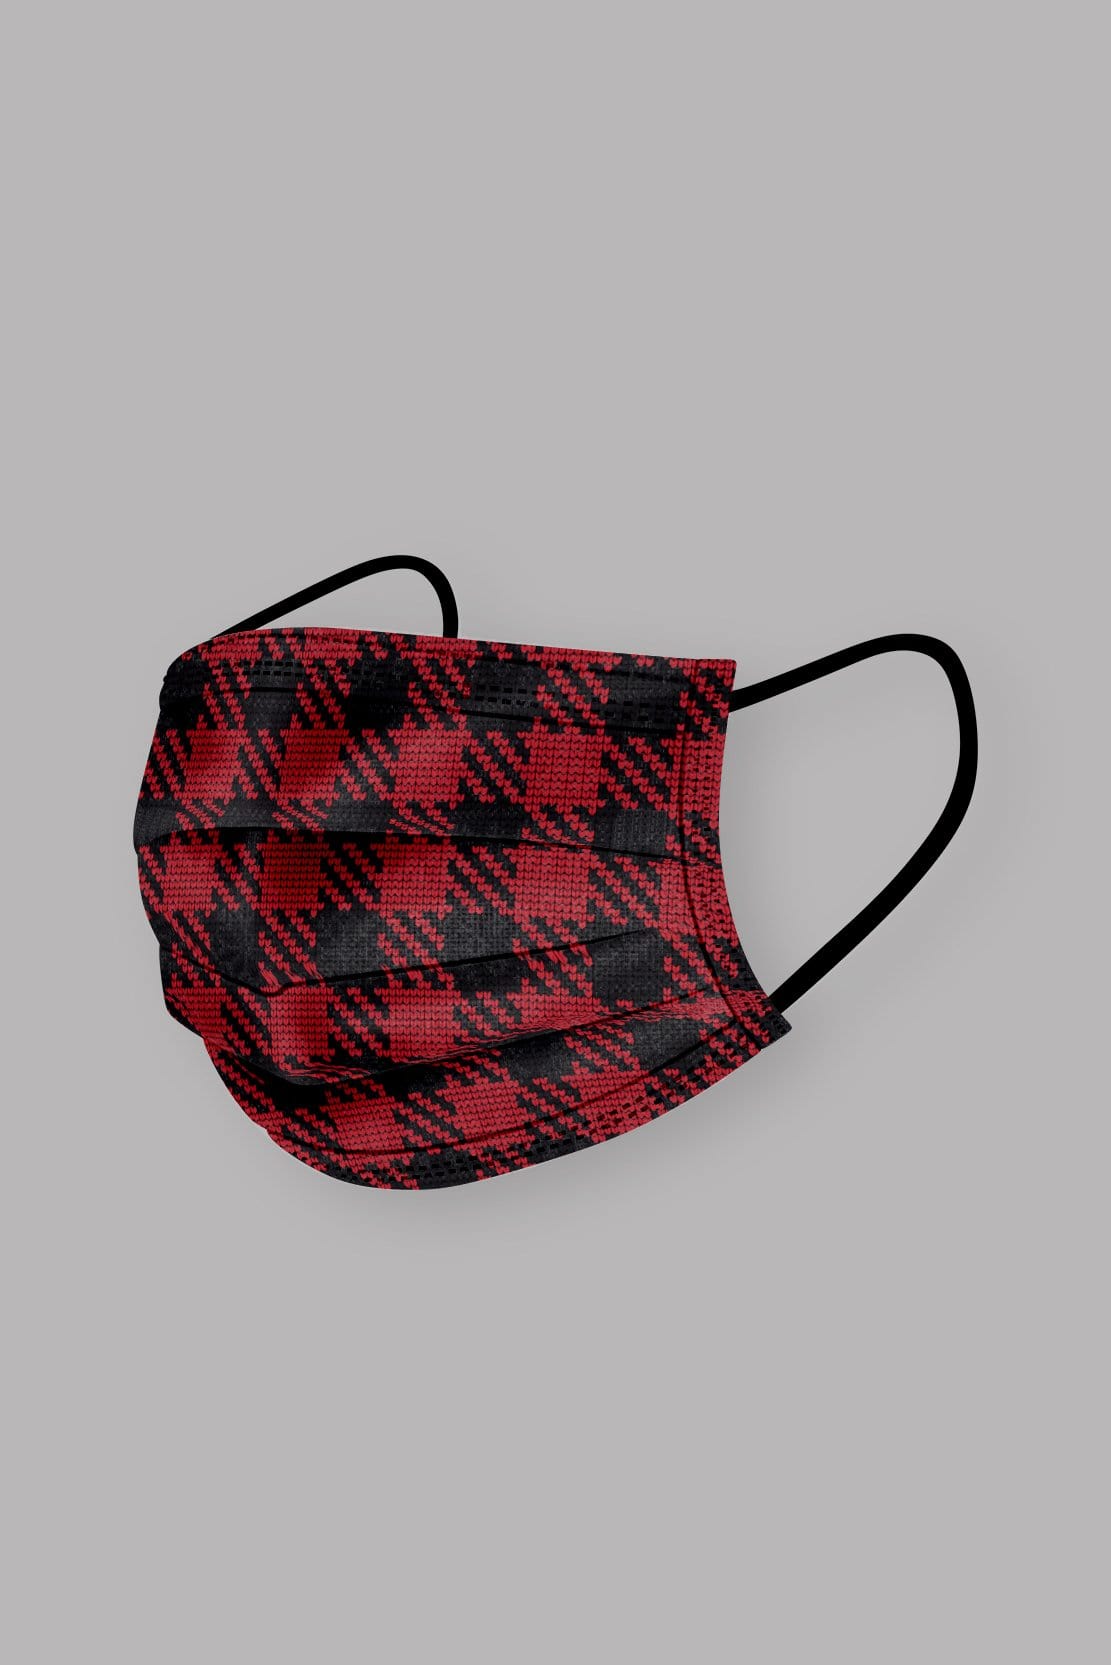 Stylish Red & Black Plaid Pleated face mask, with soft black ear loops and high quality fabric. 